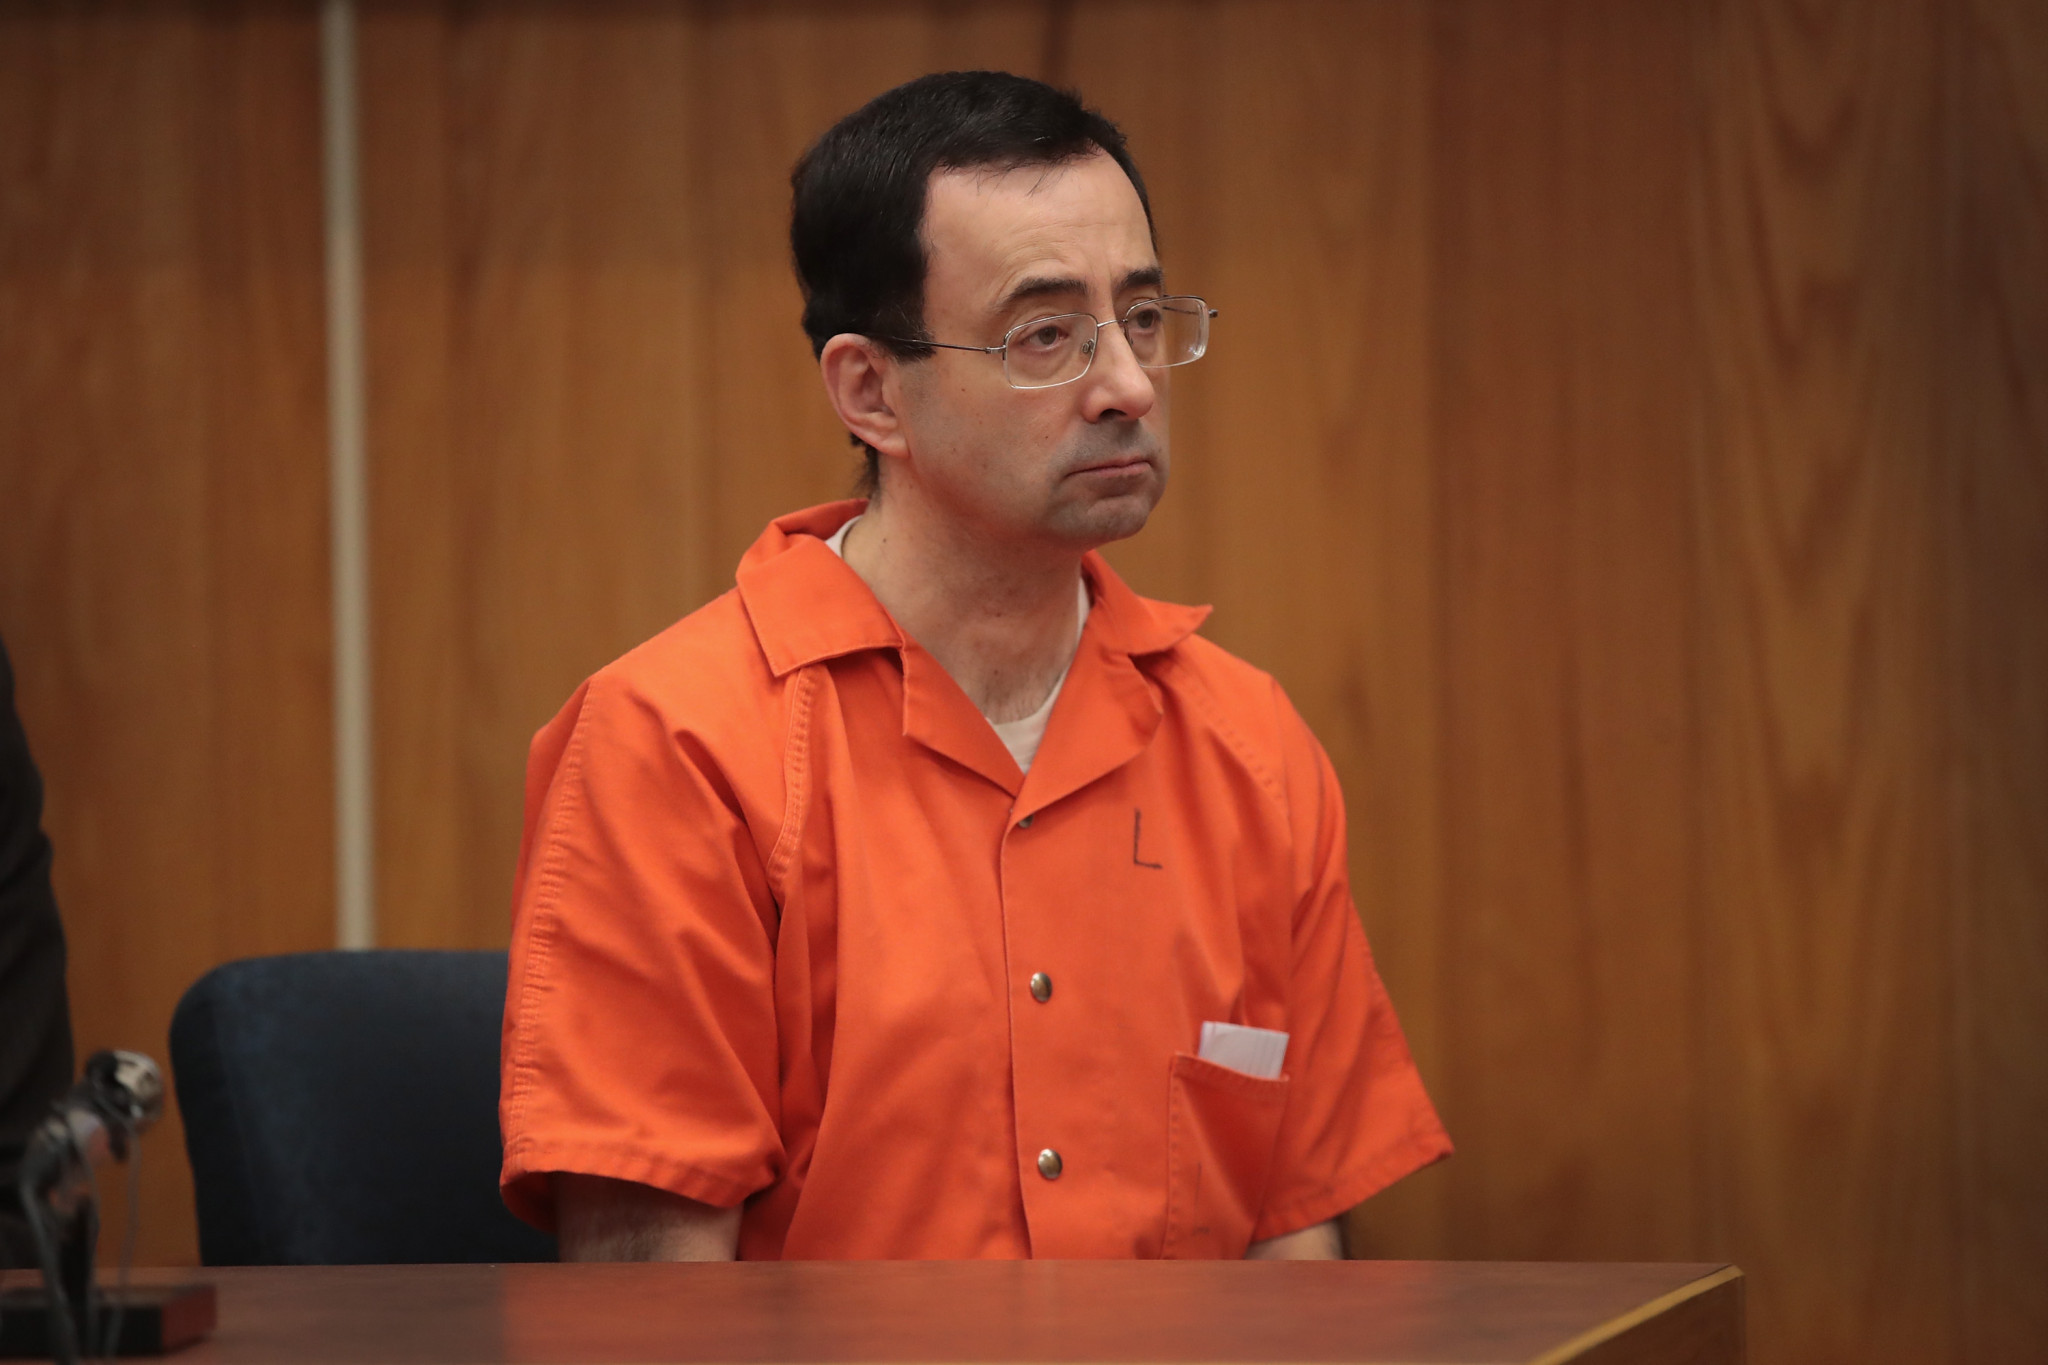 USA Gymnastics has reached a proposed $425 million agreement with a committee representing victims of the crimes of disgraced former team doctor Larry Nassar ©Getty Images